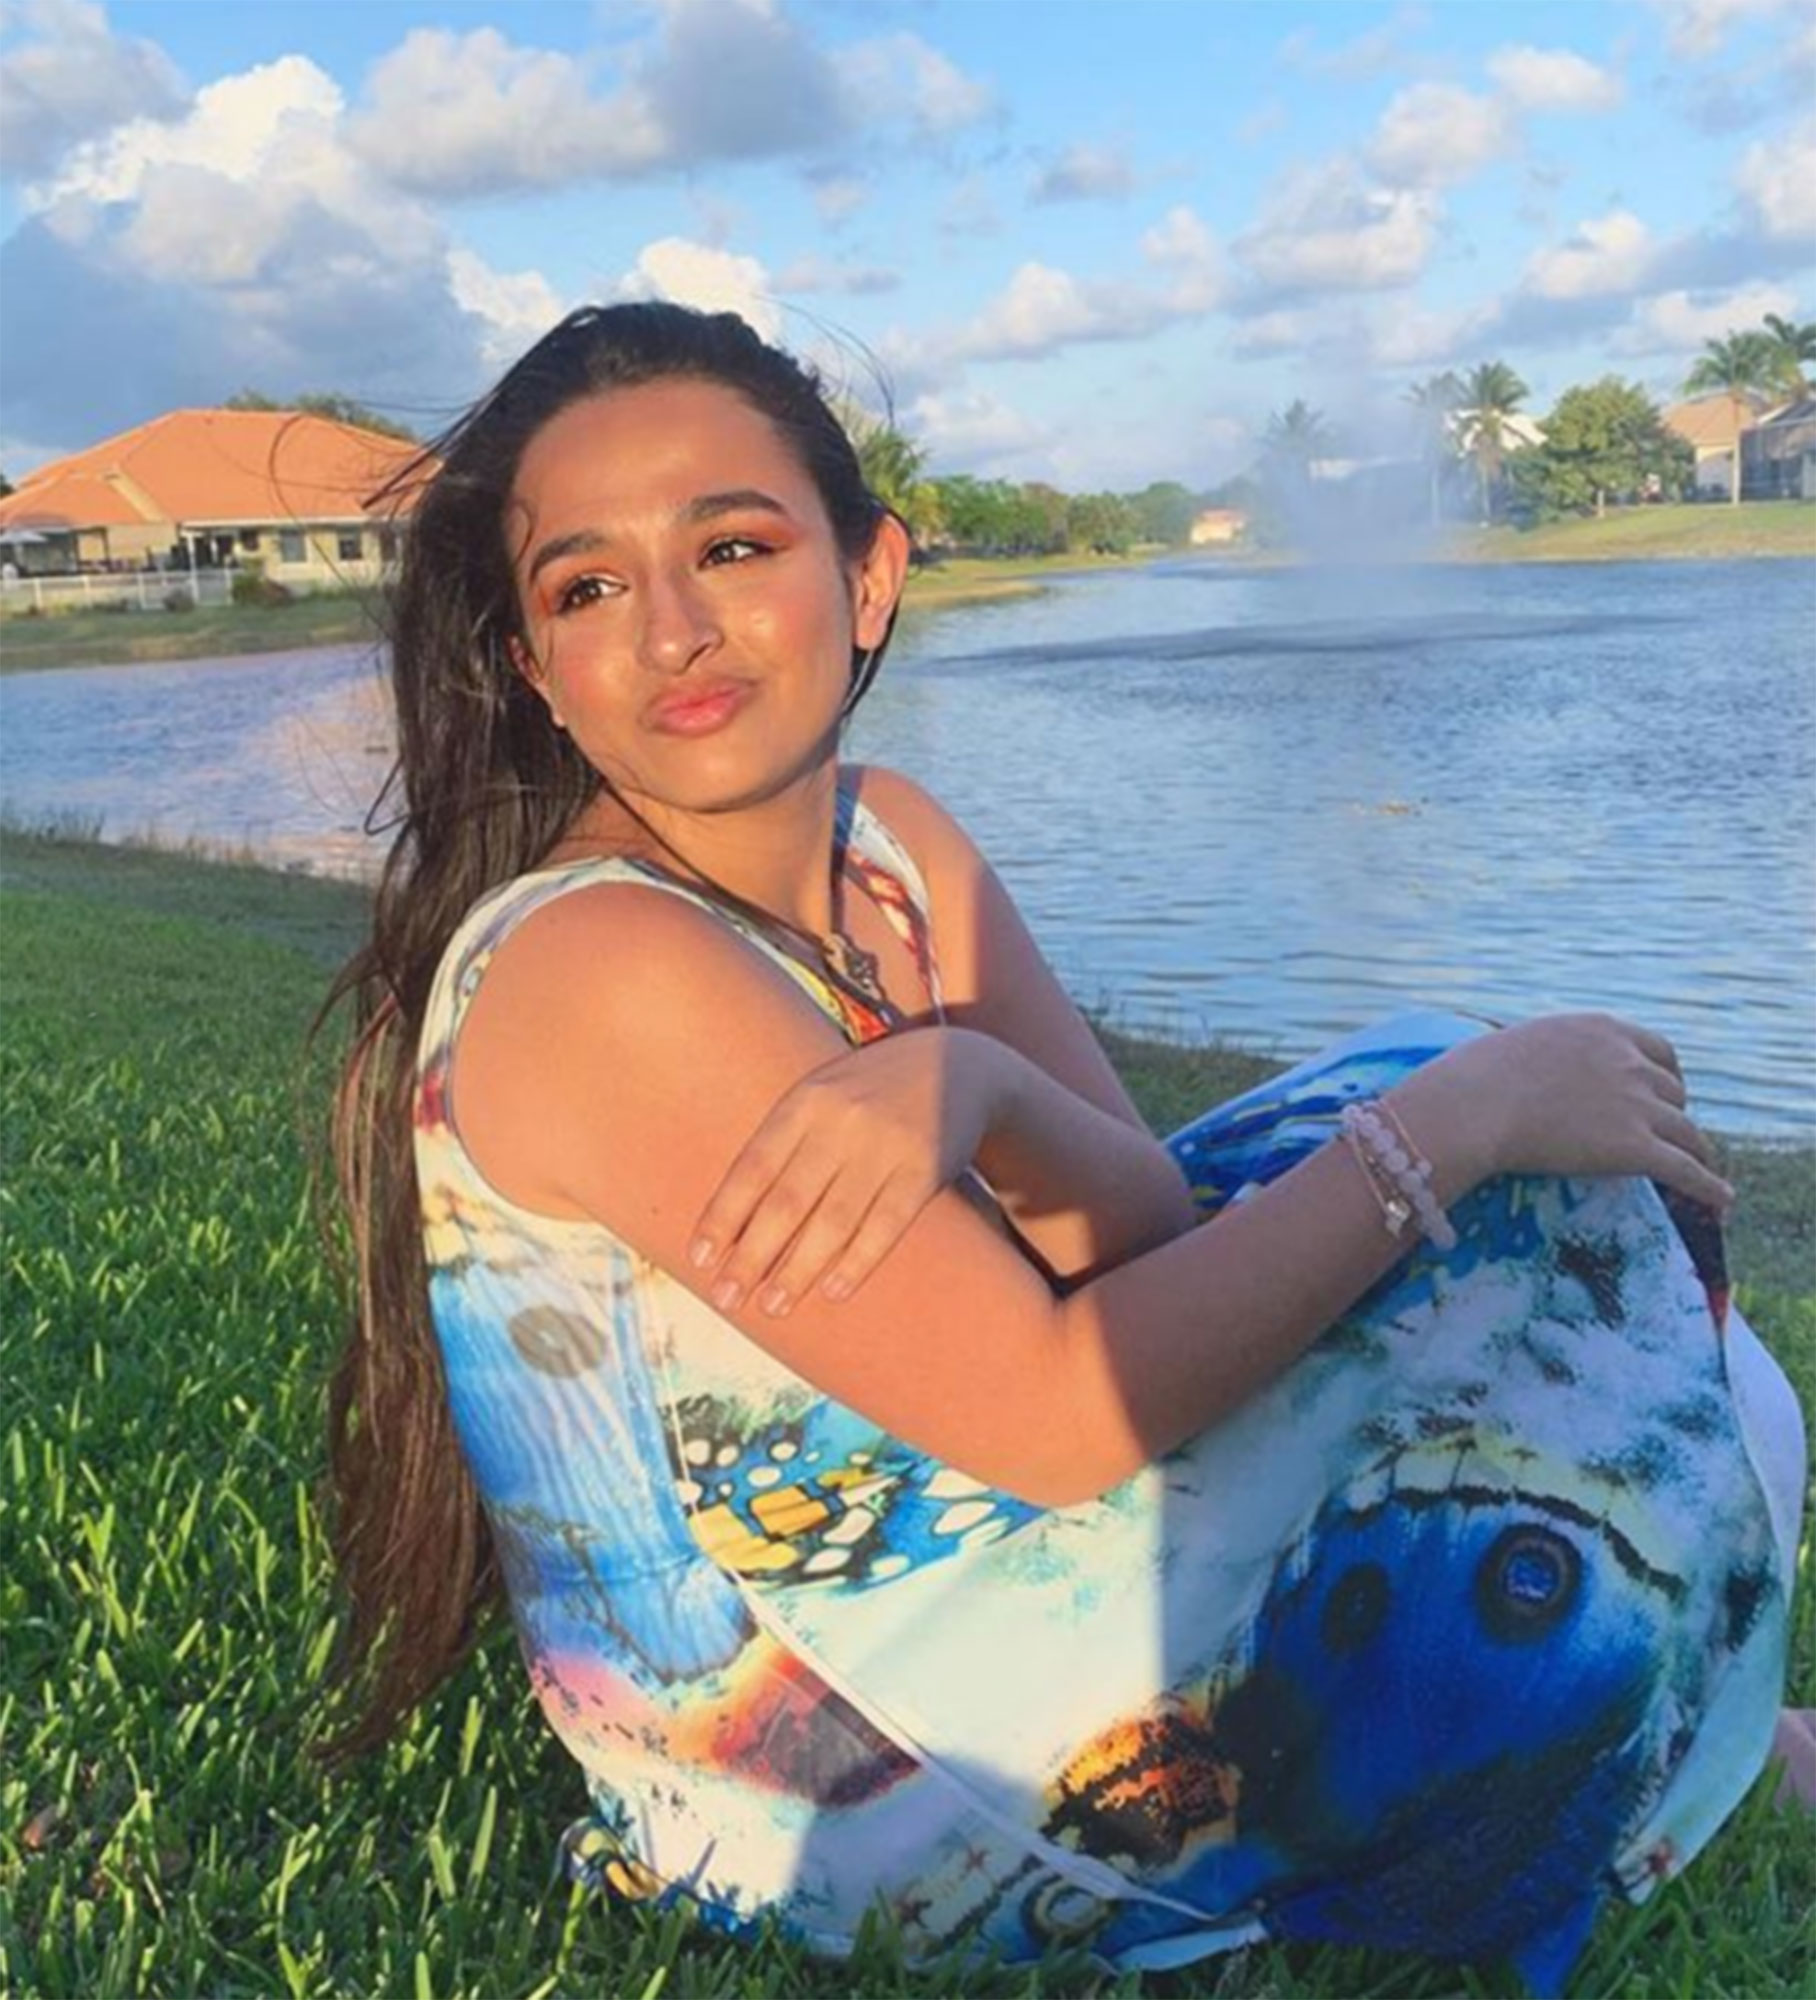 Jazz Jennings Quotes Trans Activist and 'I Am Jazz' Star Is So Inspiring